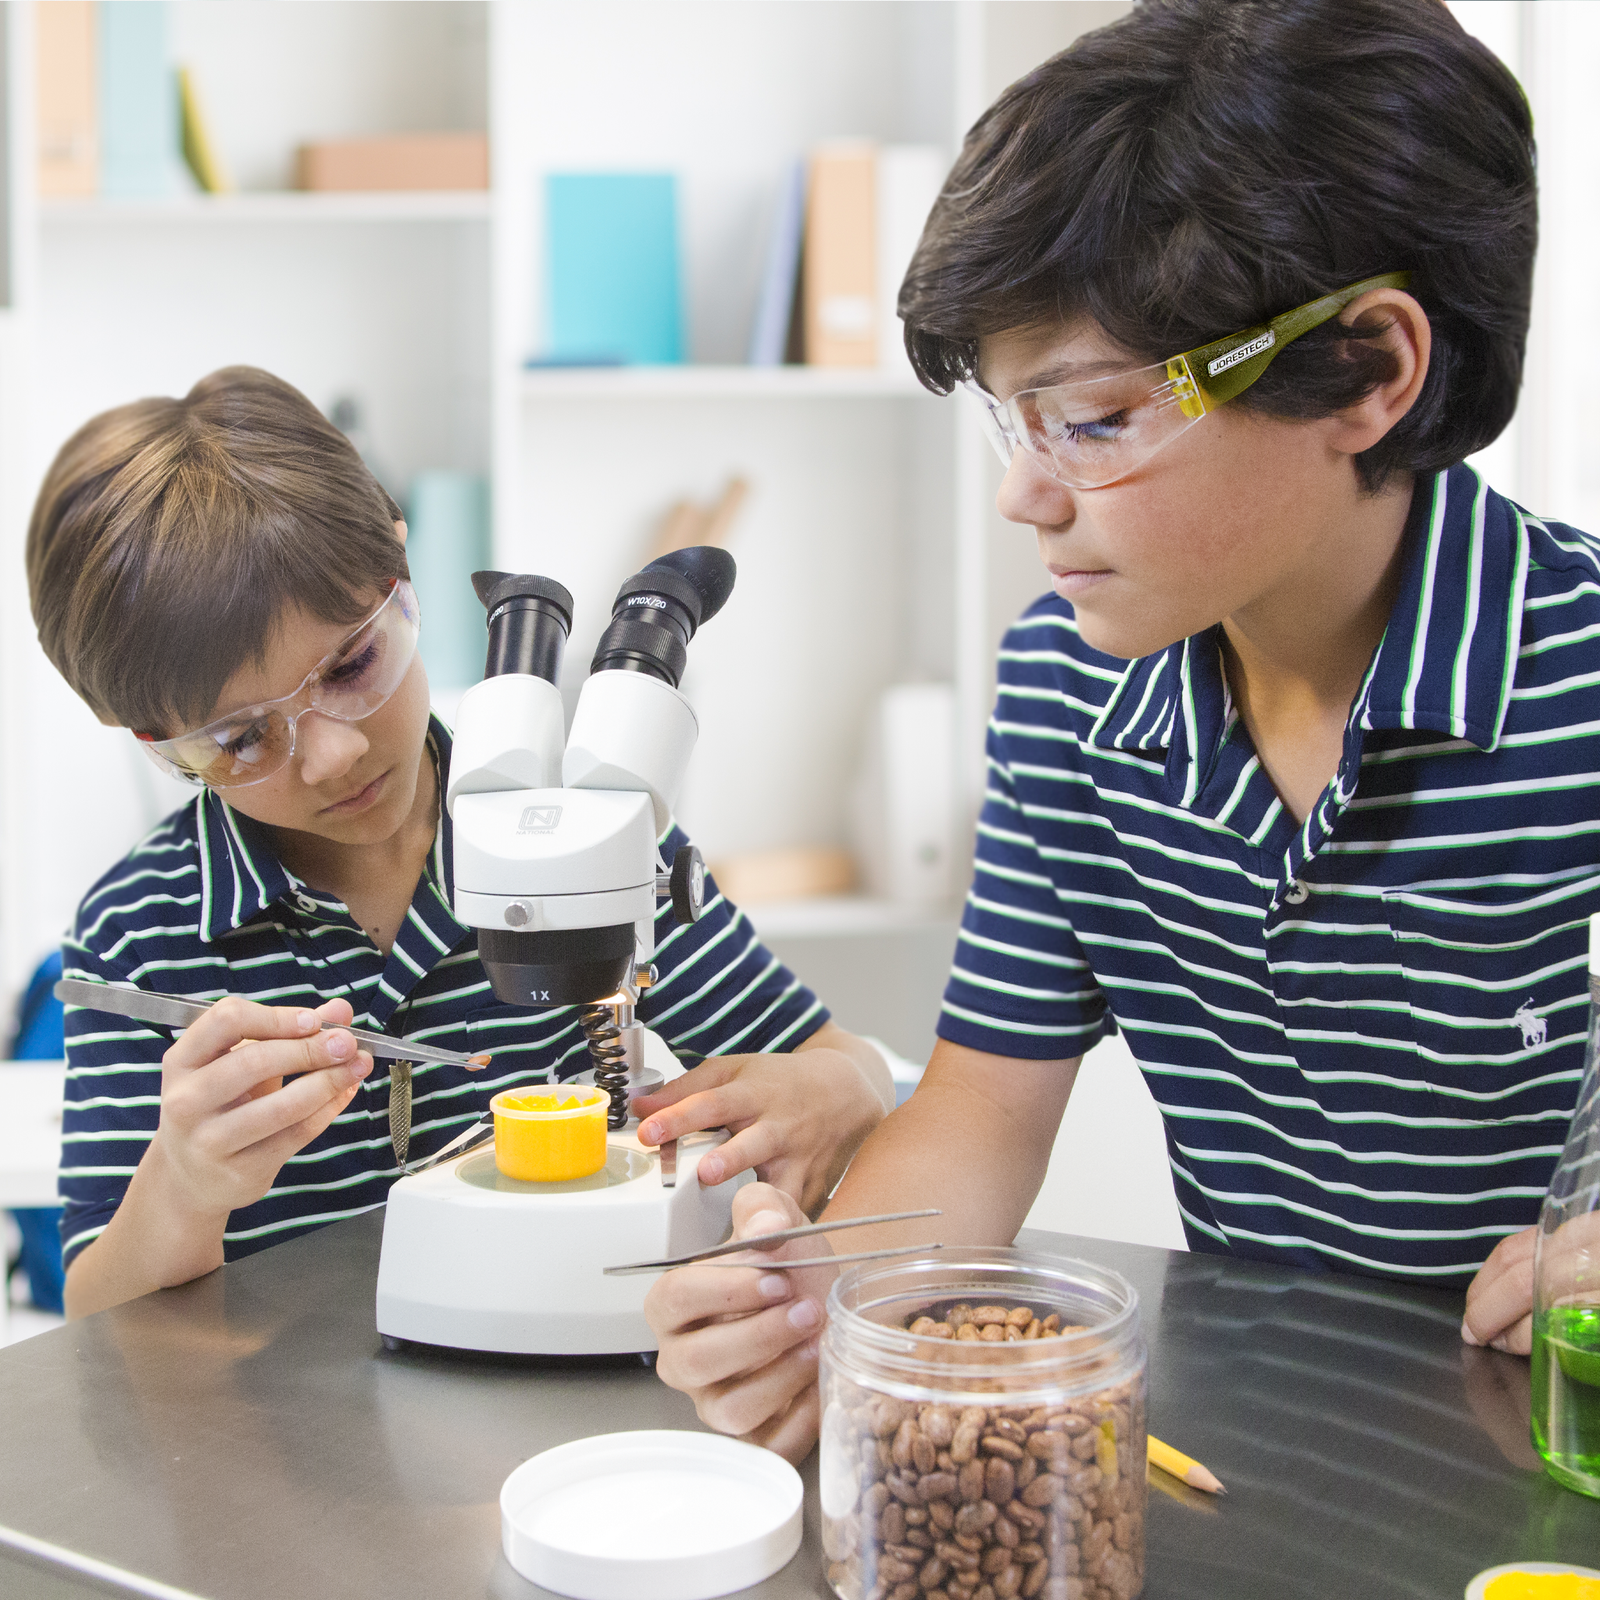 Two boys are wearing JORESTECH safety glasses while they are operating a microscope in la school lab